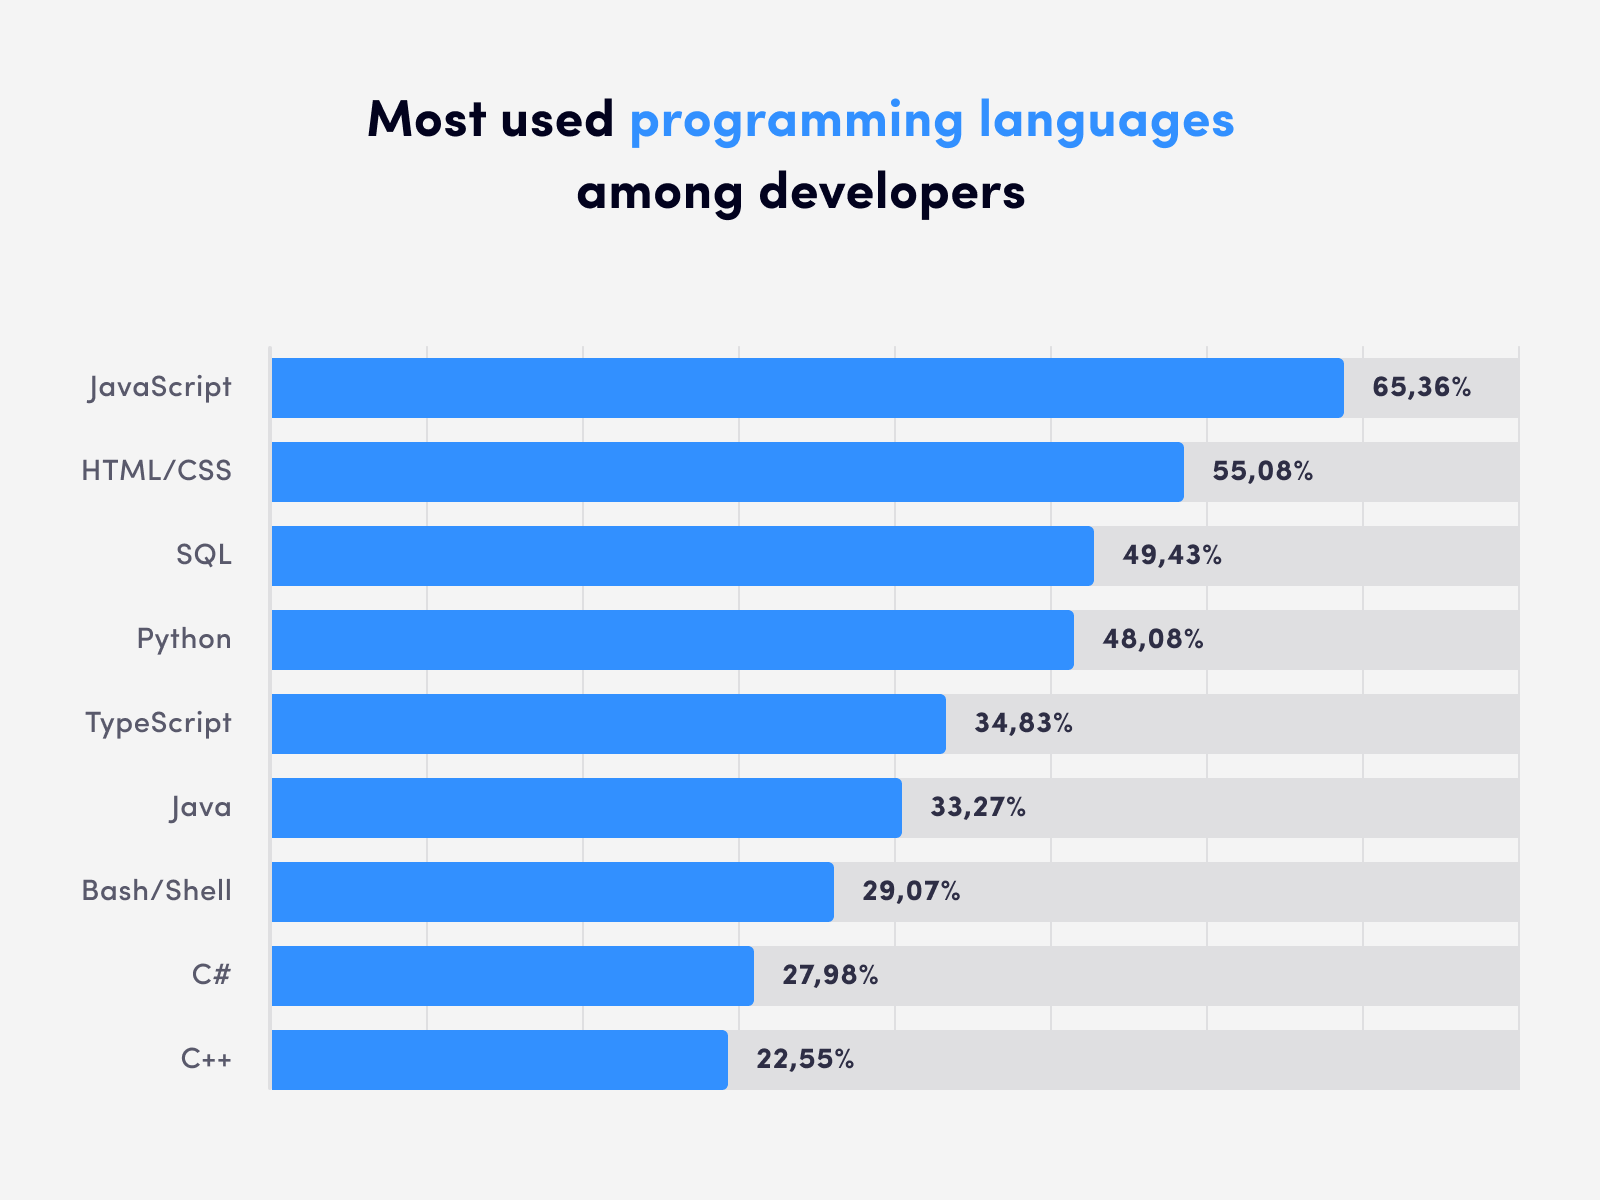 Wondering How To Make Your programming languages Rock? Read This!